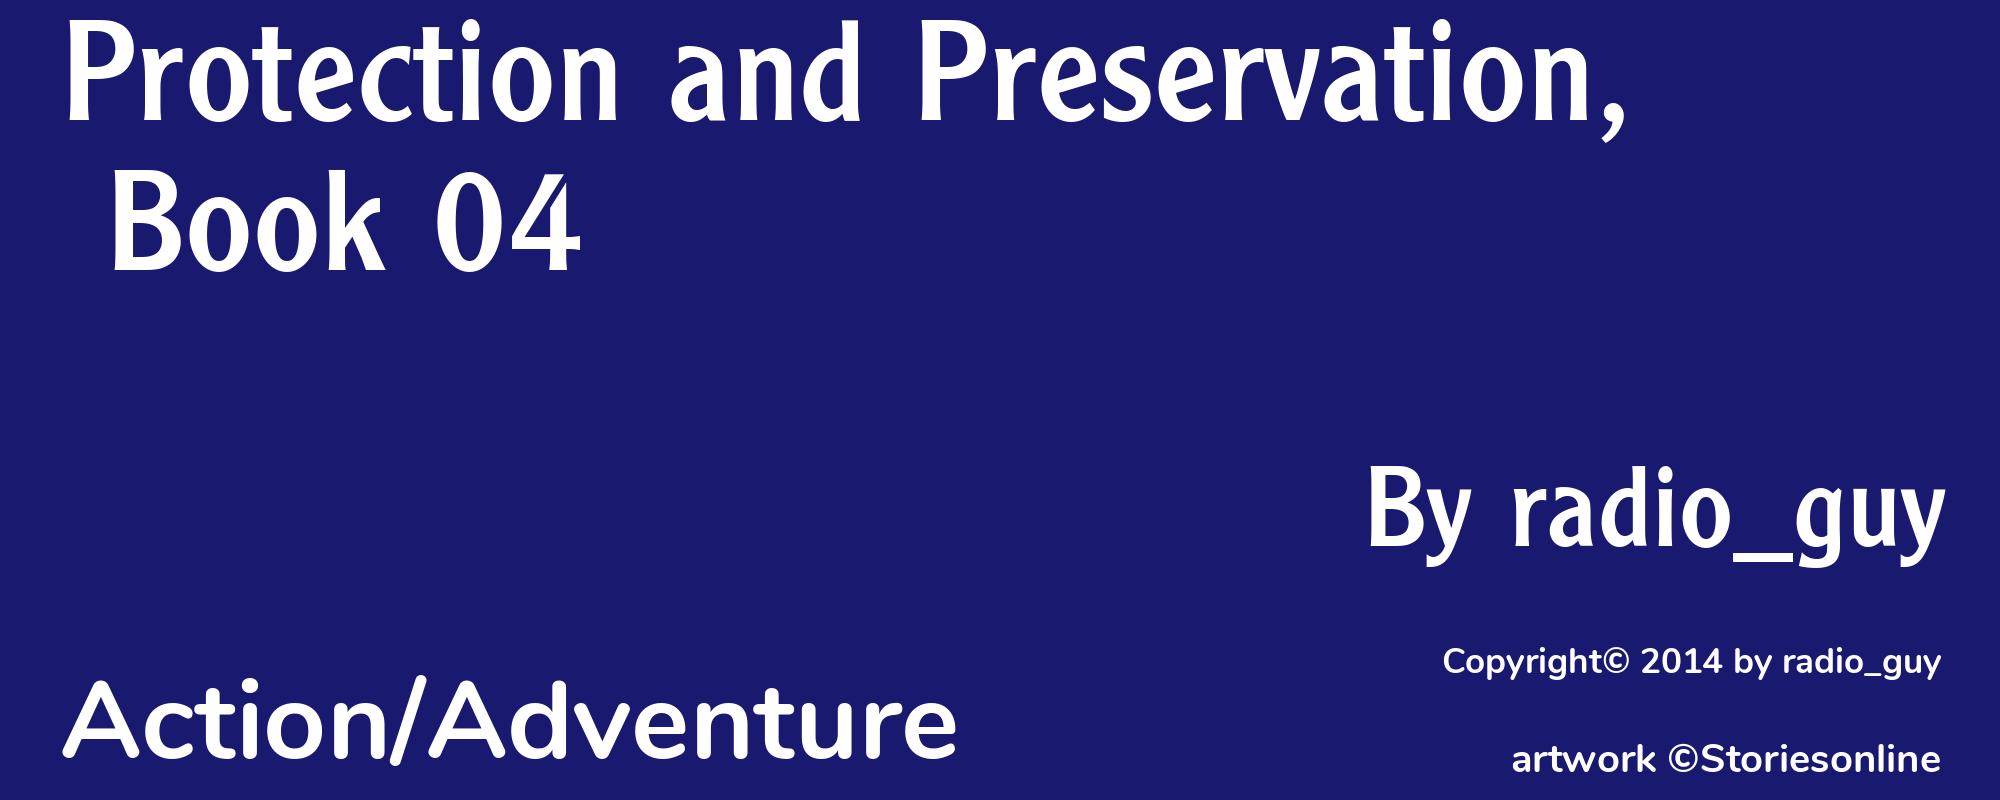 Protection and Preservation, Book 04 - Cover